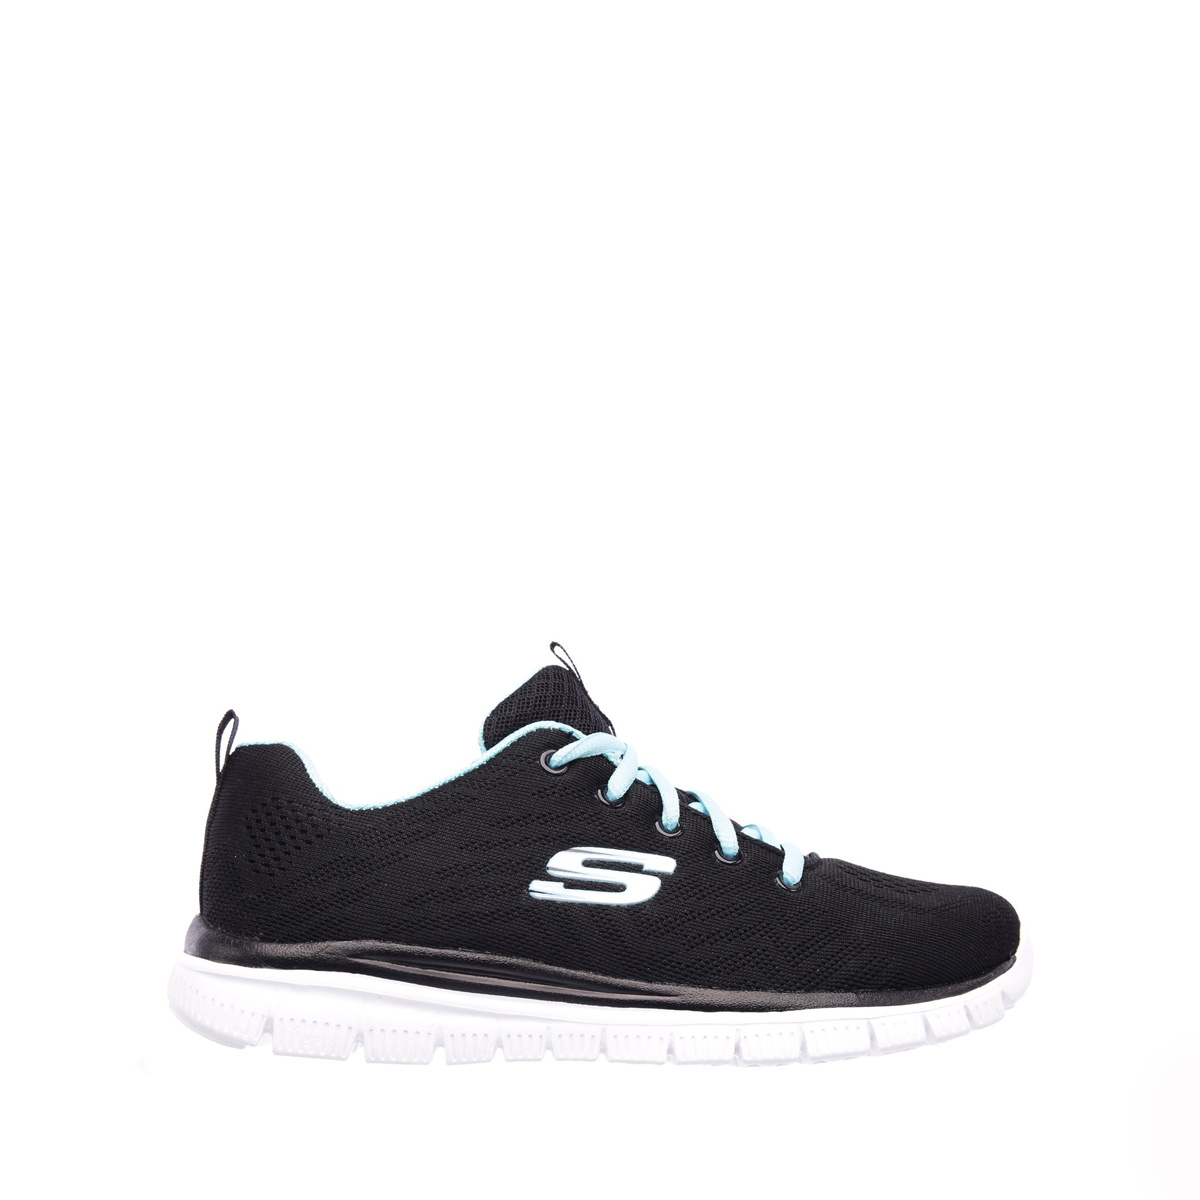 Skechers Graceful Get Connected Black/Turquoise